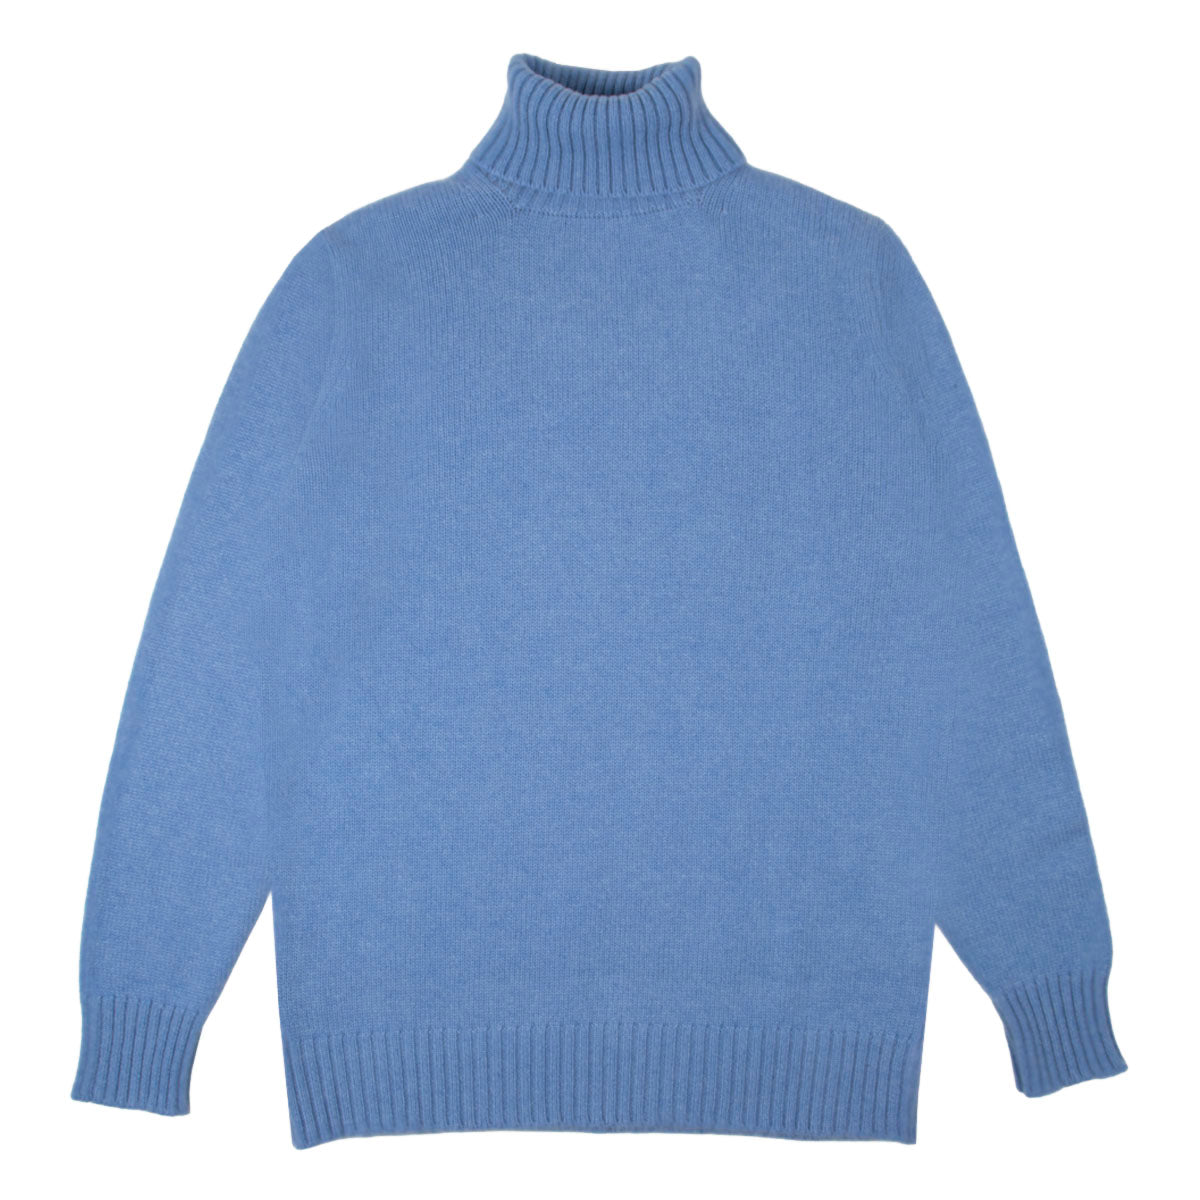 Suez Blue Portree 4ply Roll Neck Cashmere Sweater  Robert Old   